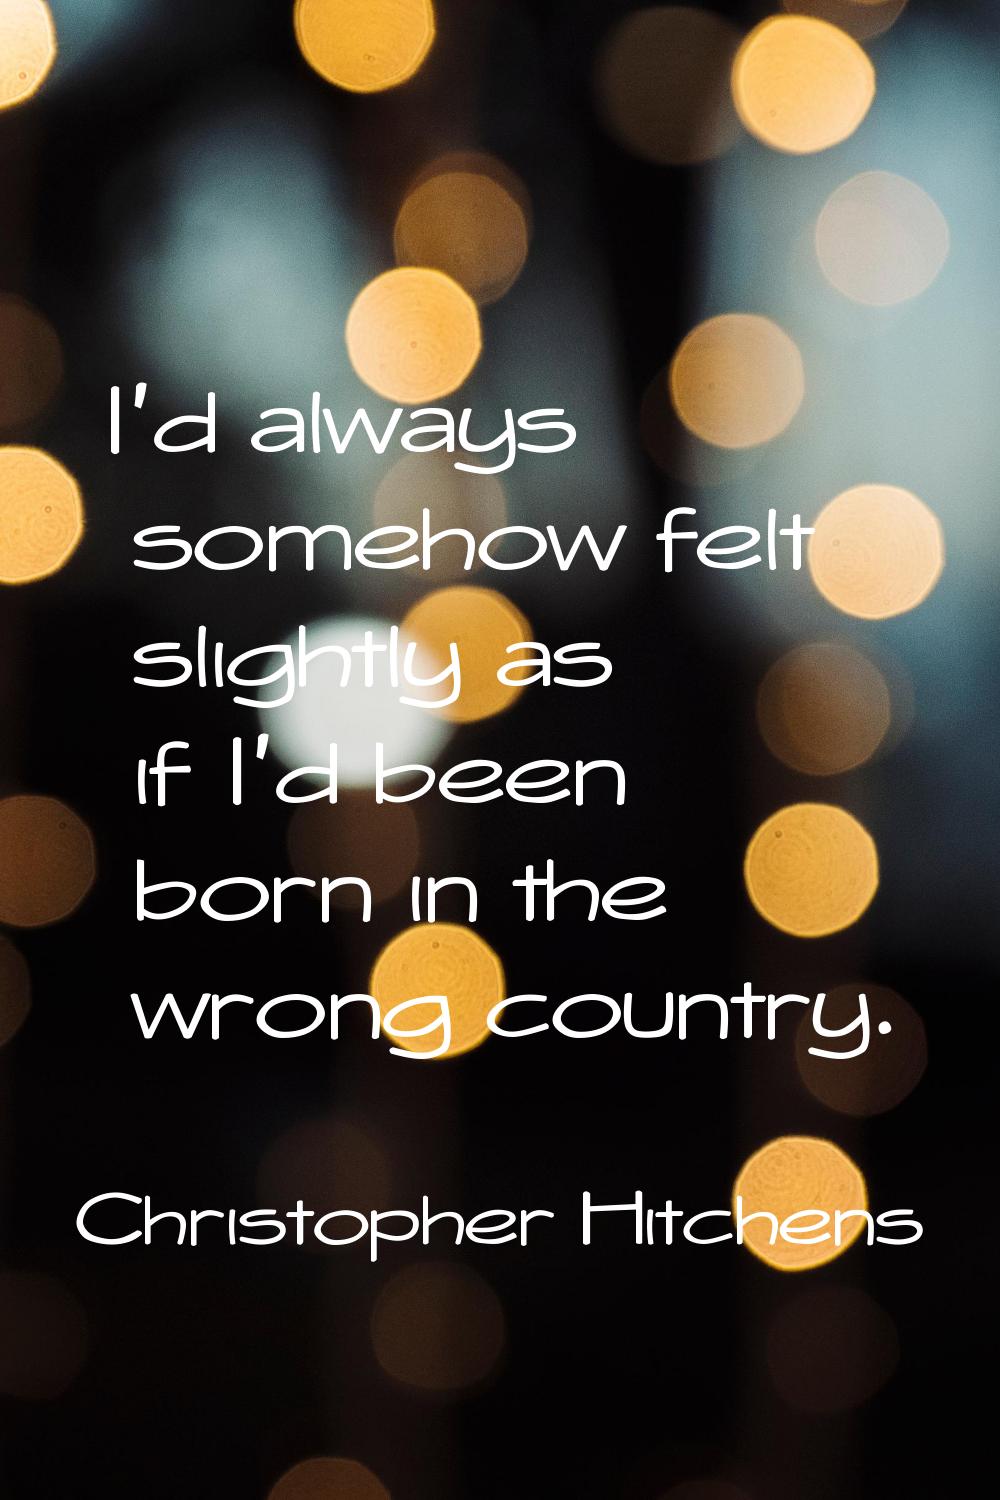 I'd always somehow felt slightly as if I'd been born in the wrong country.